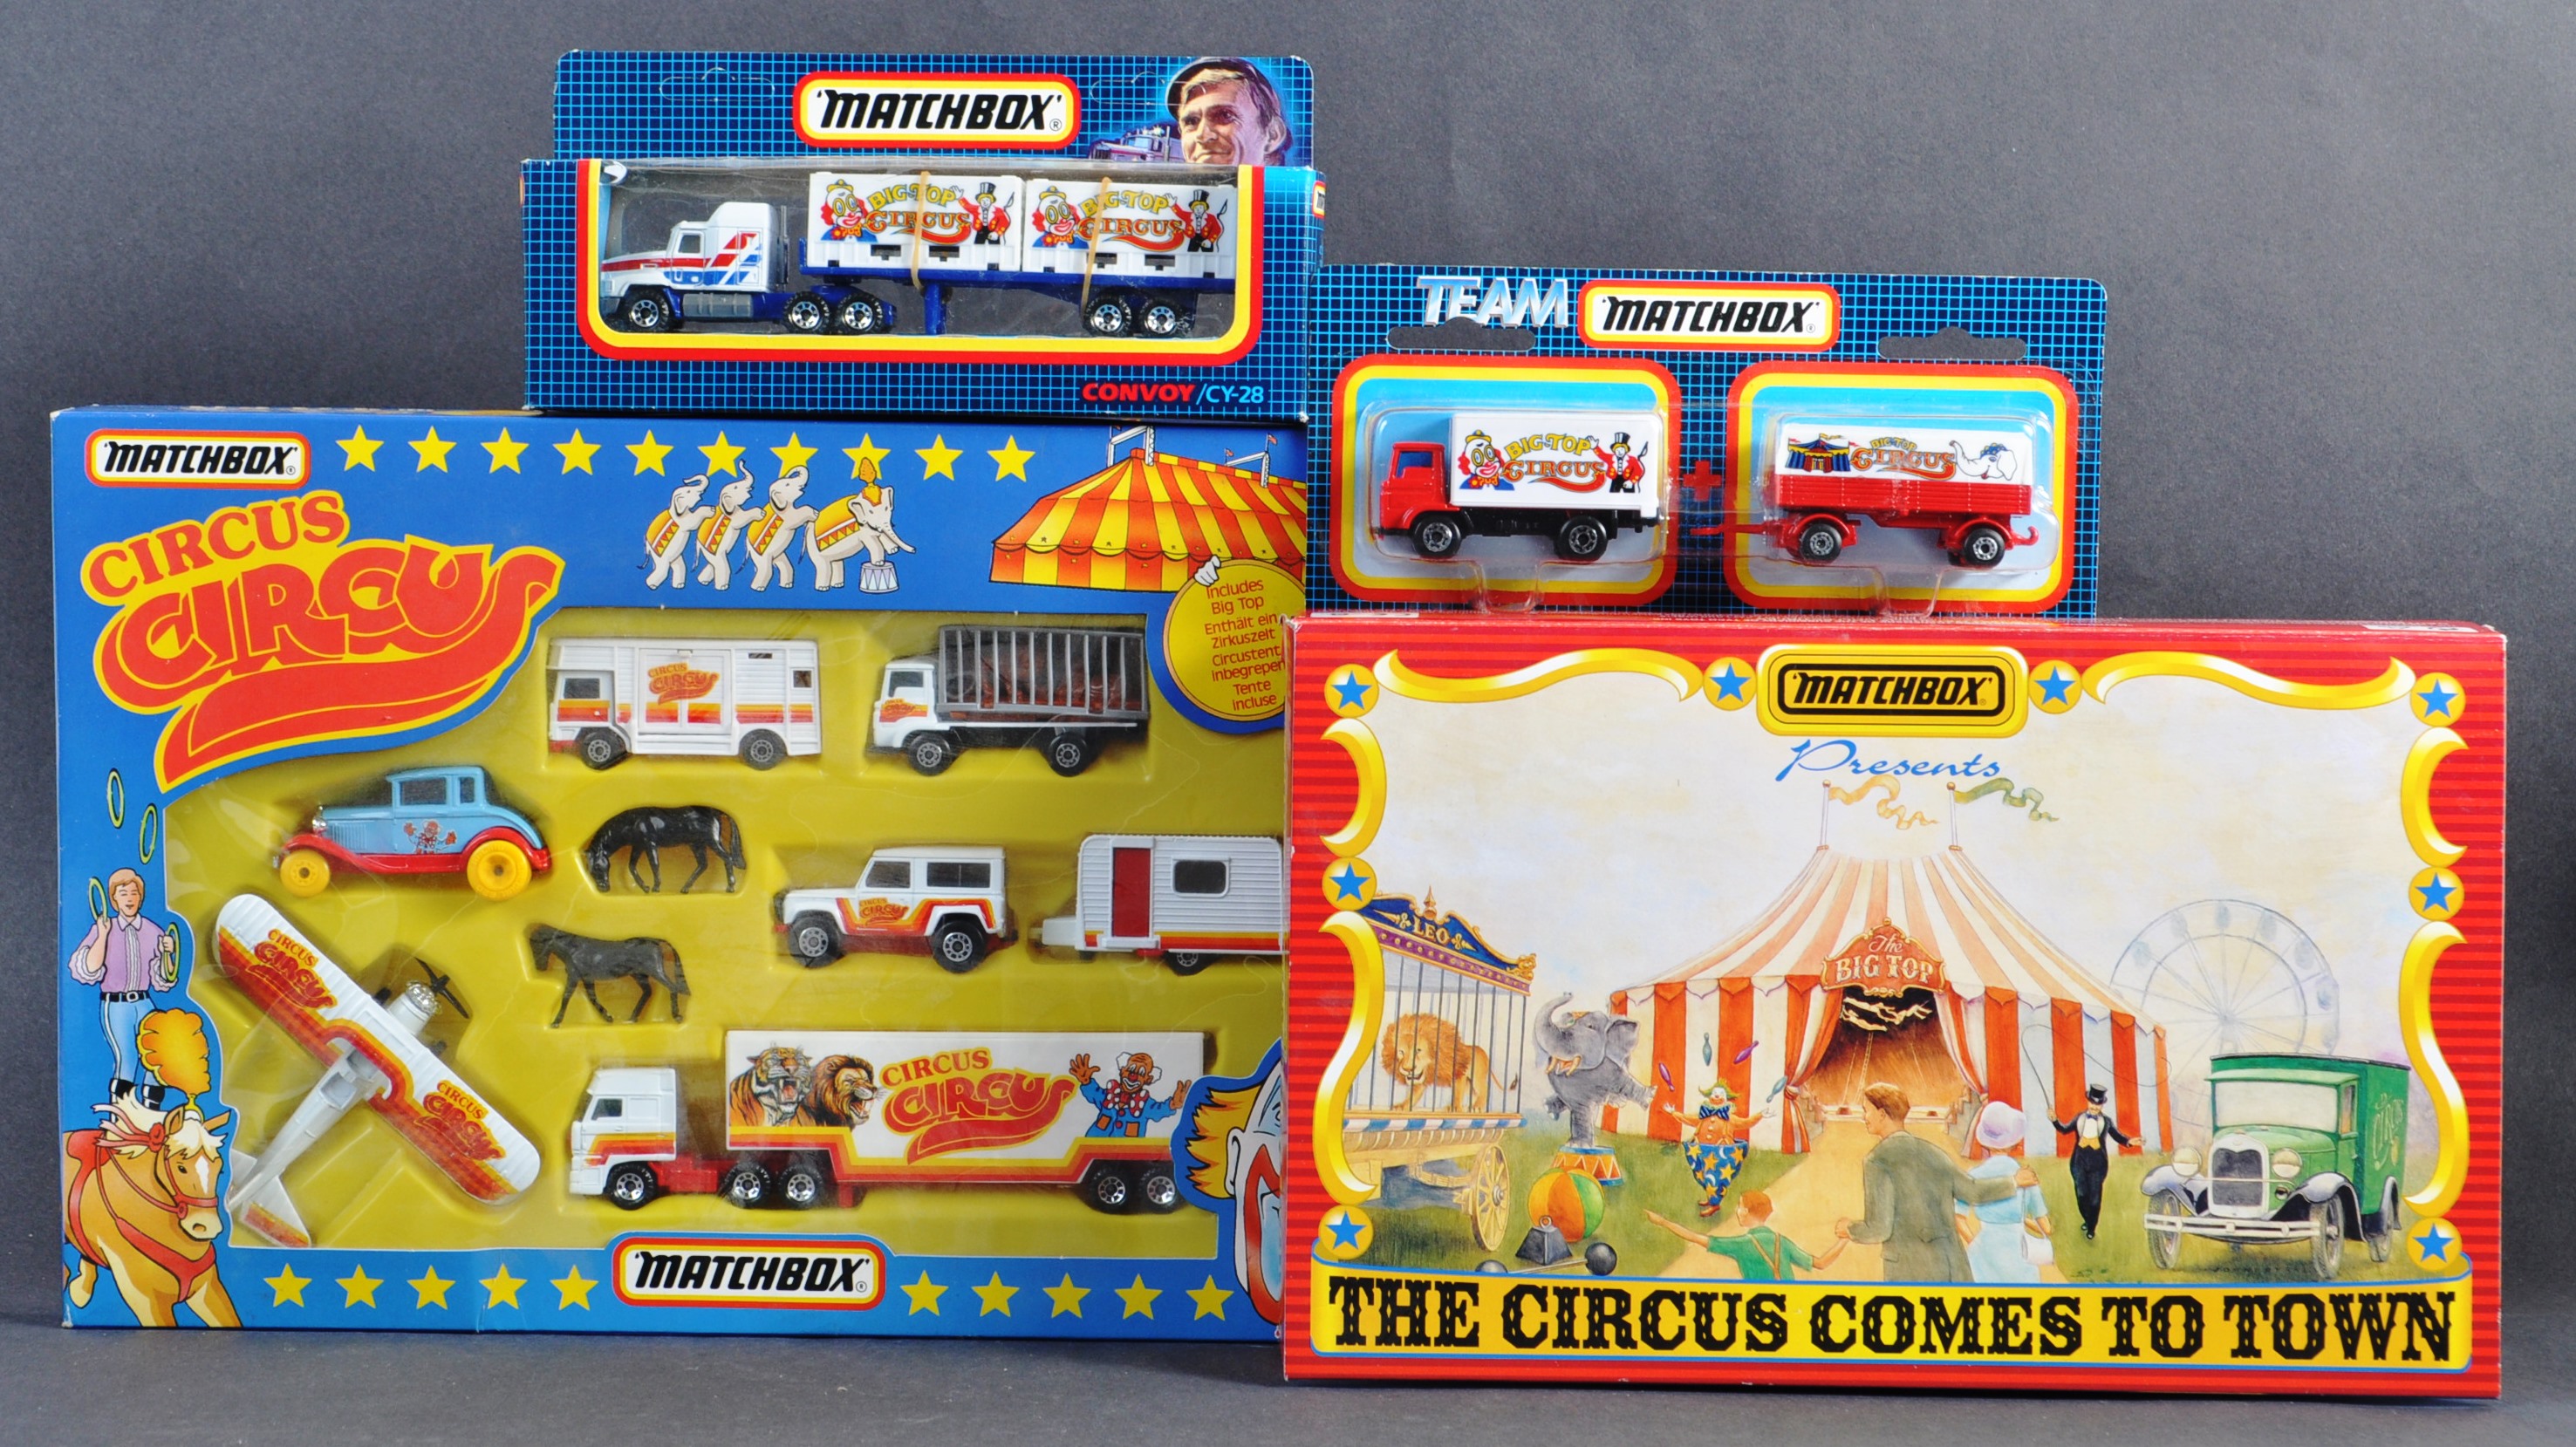 COLLECTION OF MATCHBOX CIRCUS RELATED DIECAST MODELS